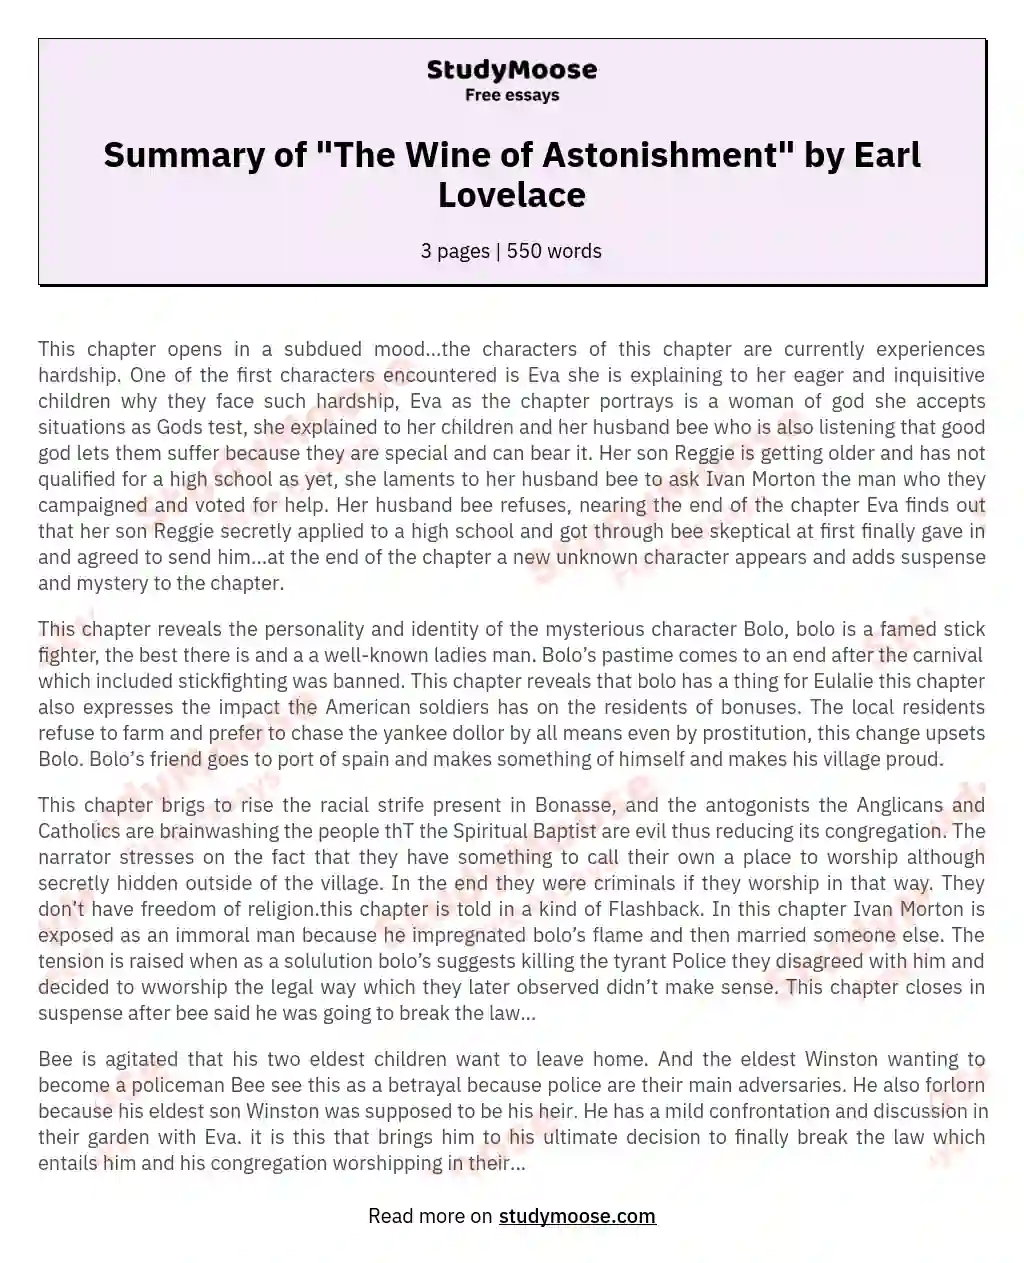 Summary of "The Wine of Astonishment" by Earl Lovelace essay